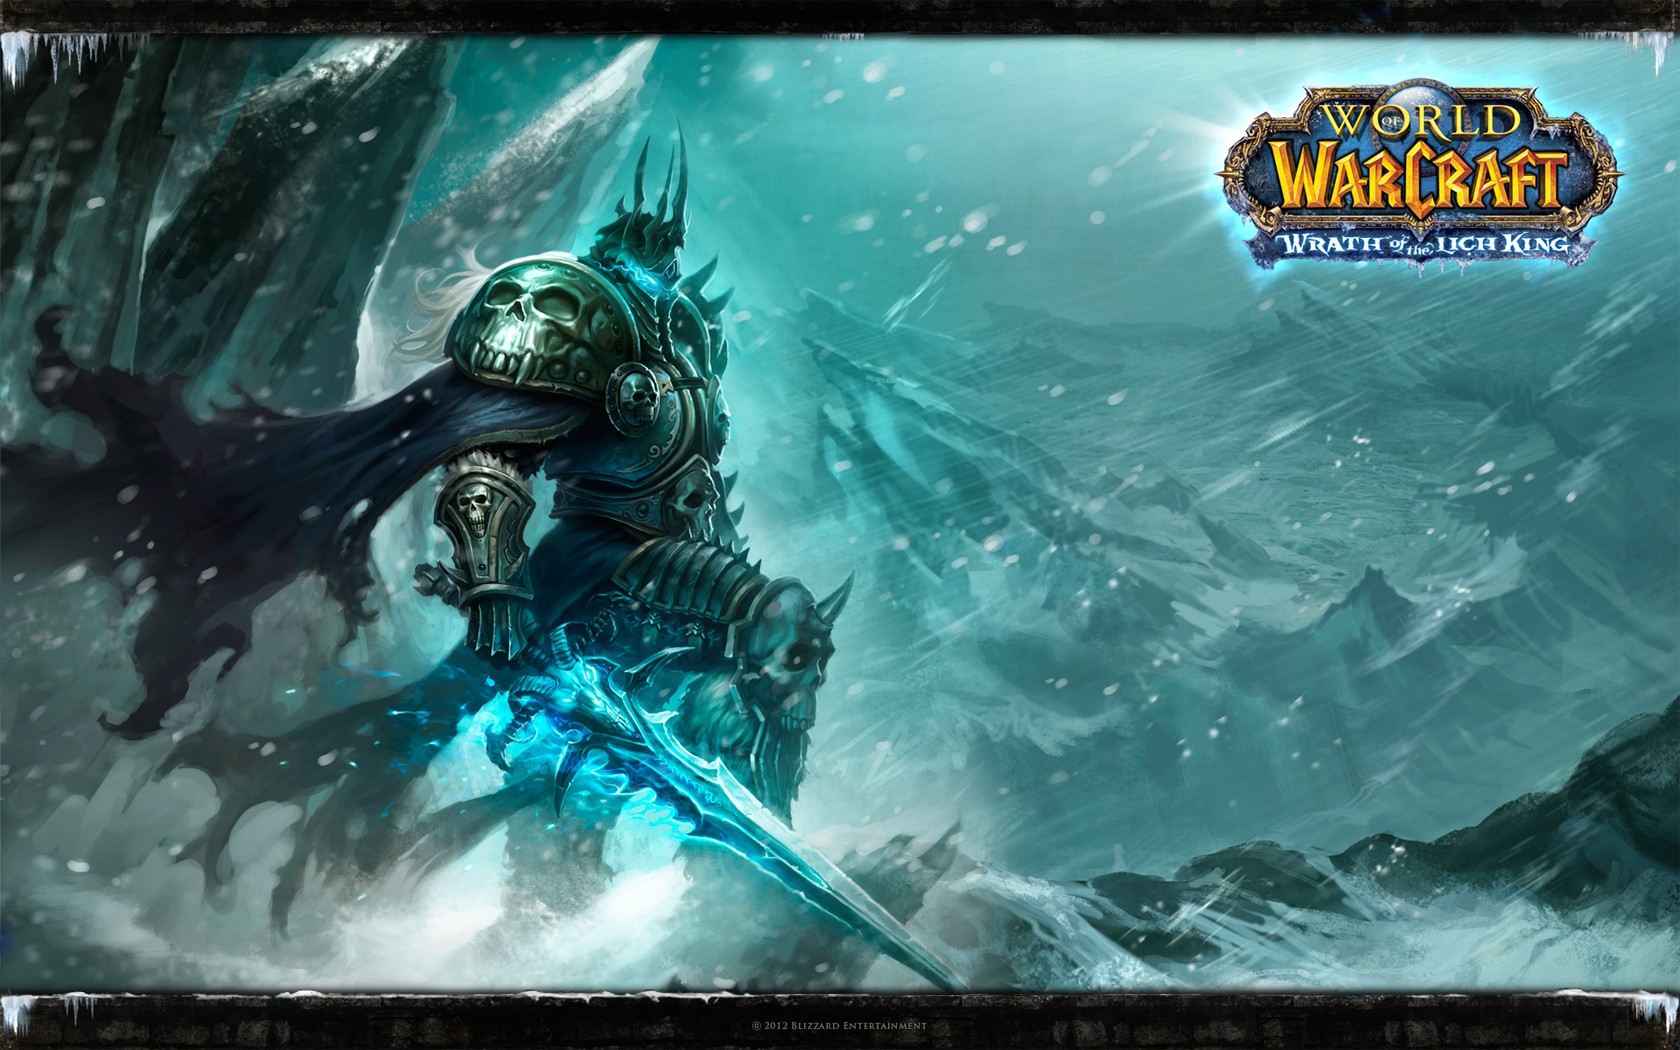 Warcraft, World of Warcraft: Wrath of the Lich King, World of Warcraft, Video games Wallpaper